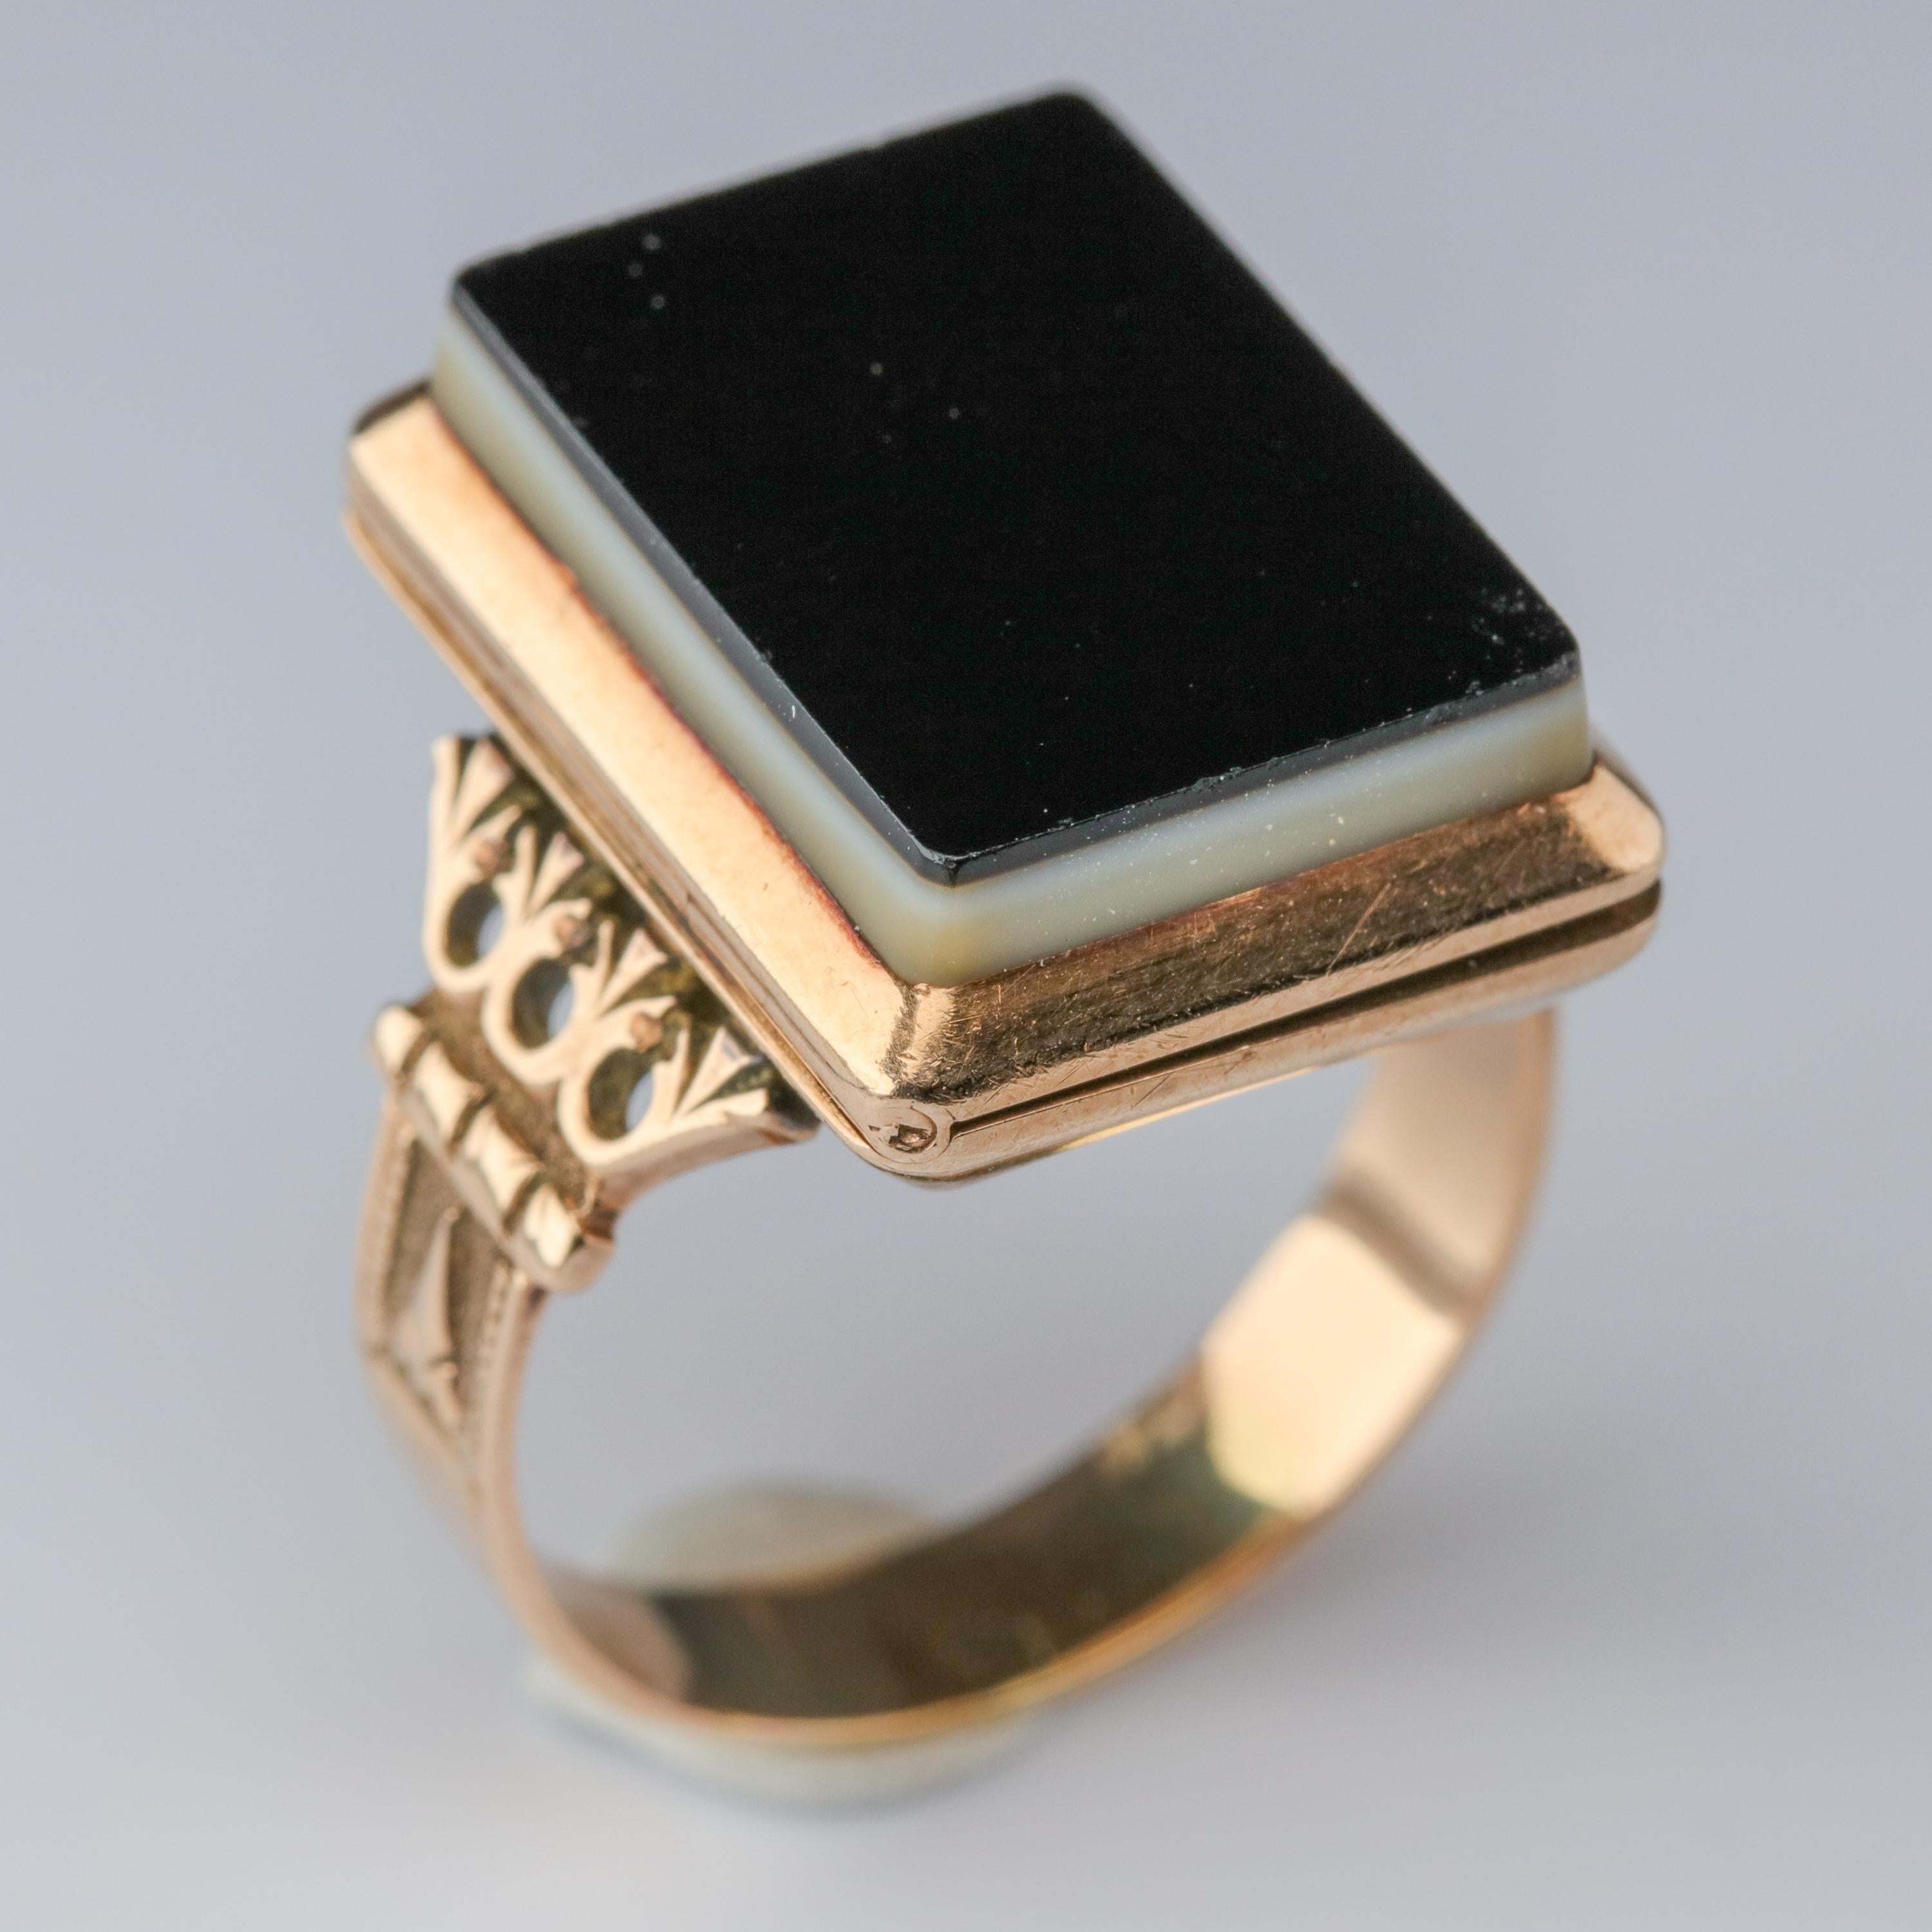 Georgian Poison Ring in Gold with Onyx is Cunningly Beautiful 3